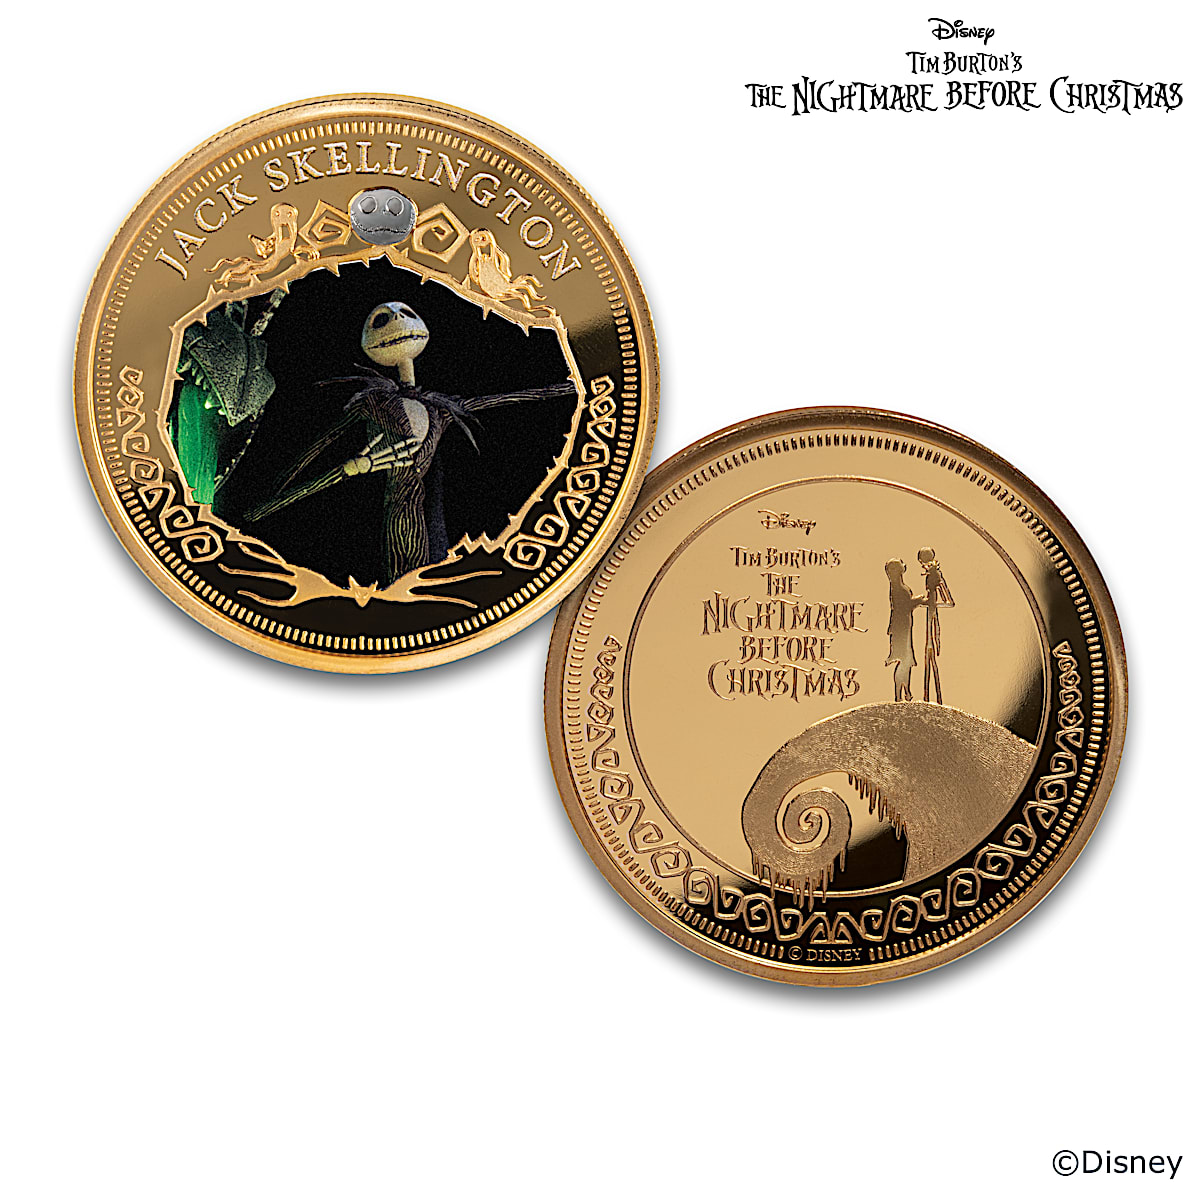 Disney Tim Burtons The Nightmare Before Christmas 24K Gold-Plated Proofs  With Images From Movie